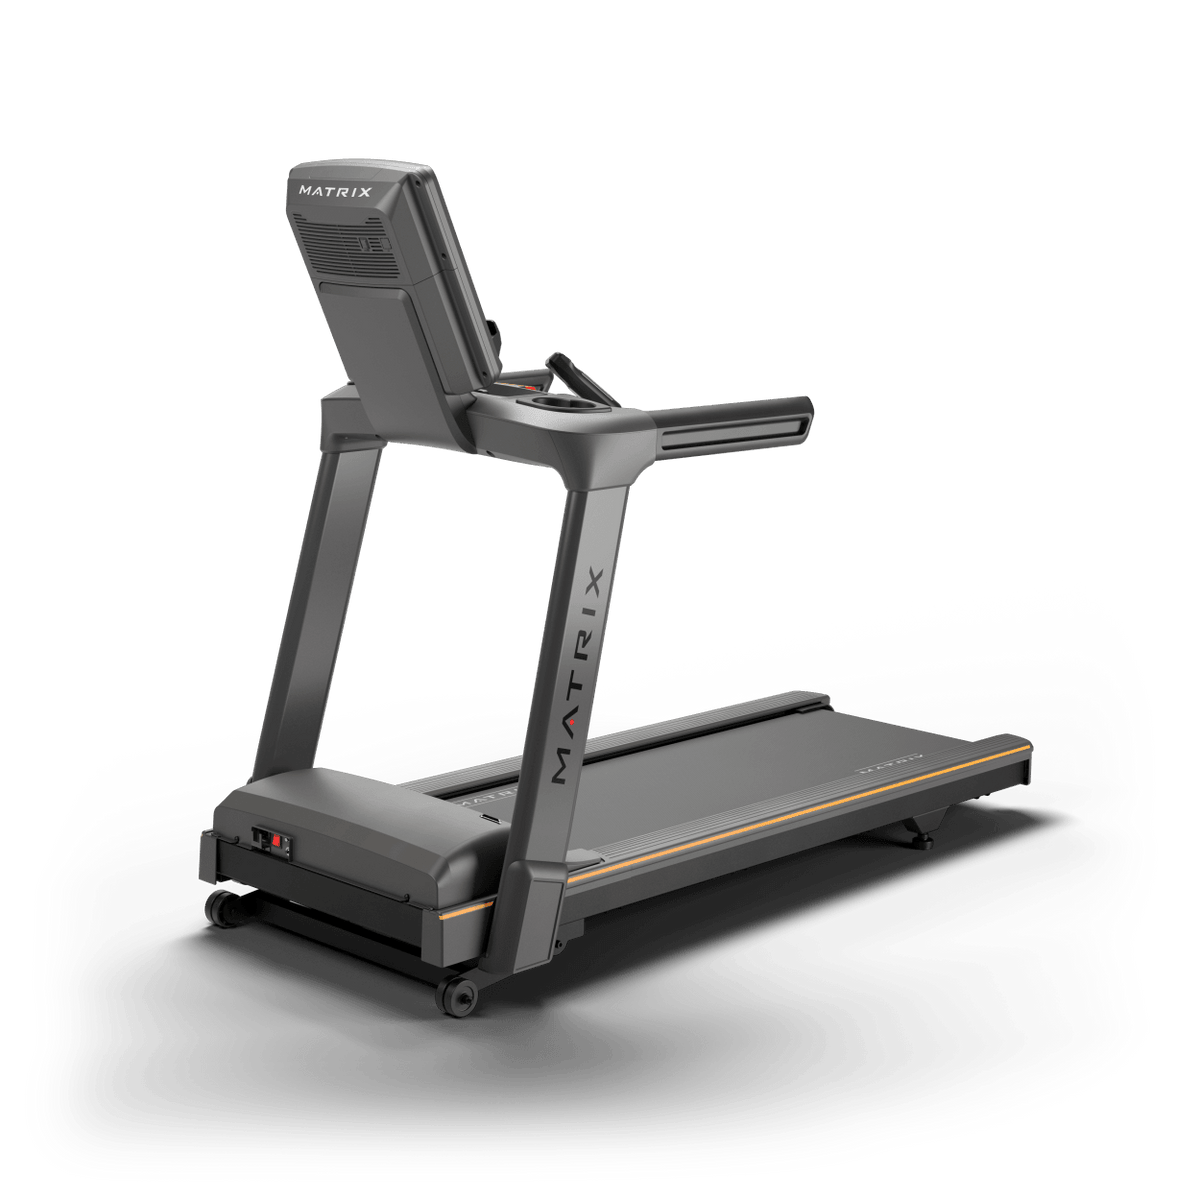 Matrix Fitness Lifestyle Treadmill with Touch Console rear view | Fitness Experience